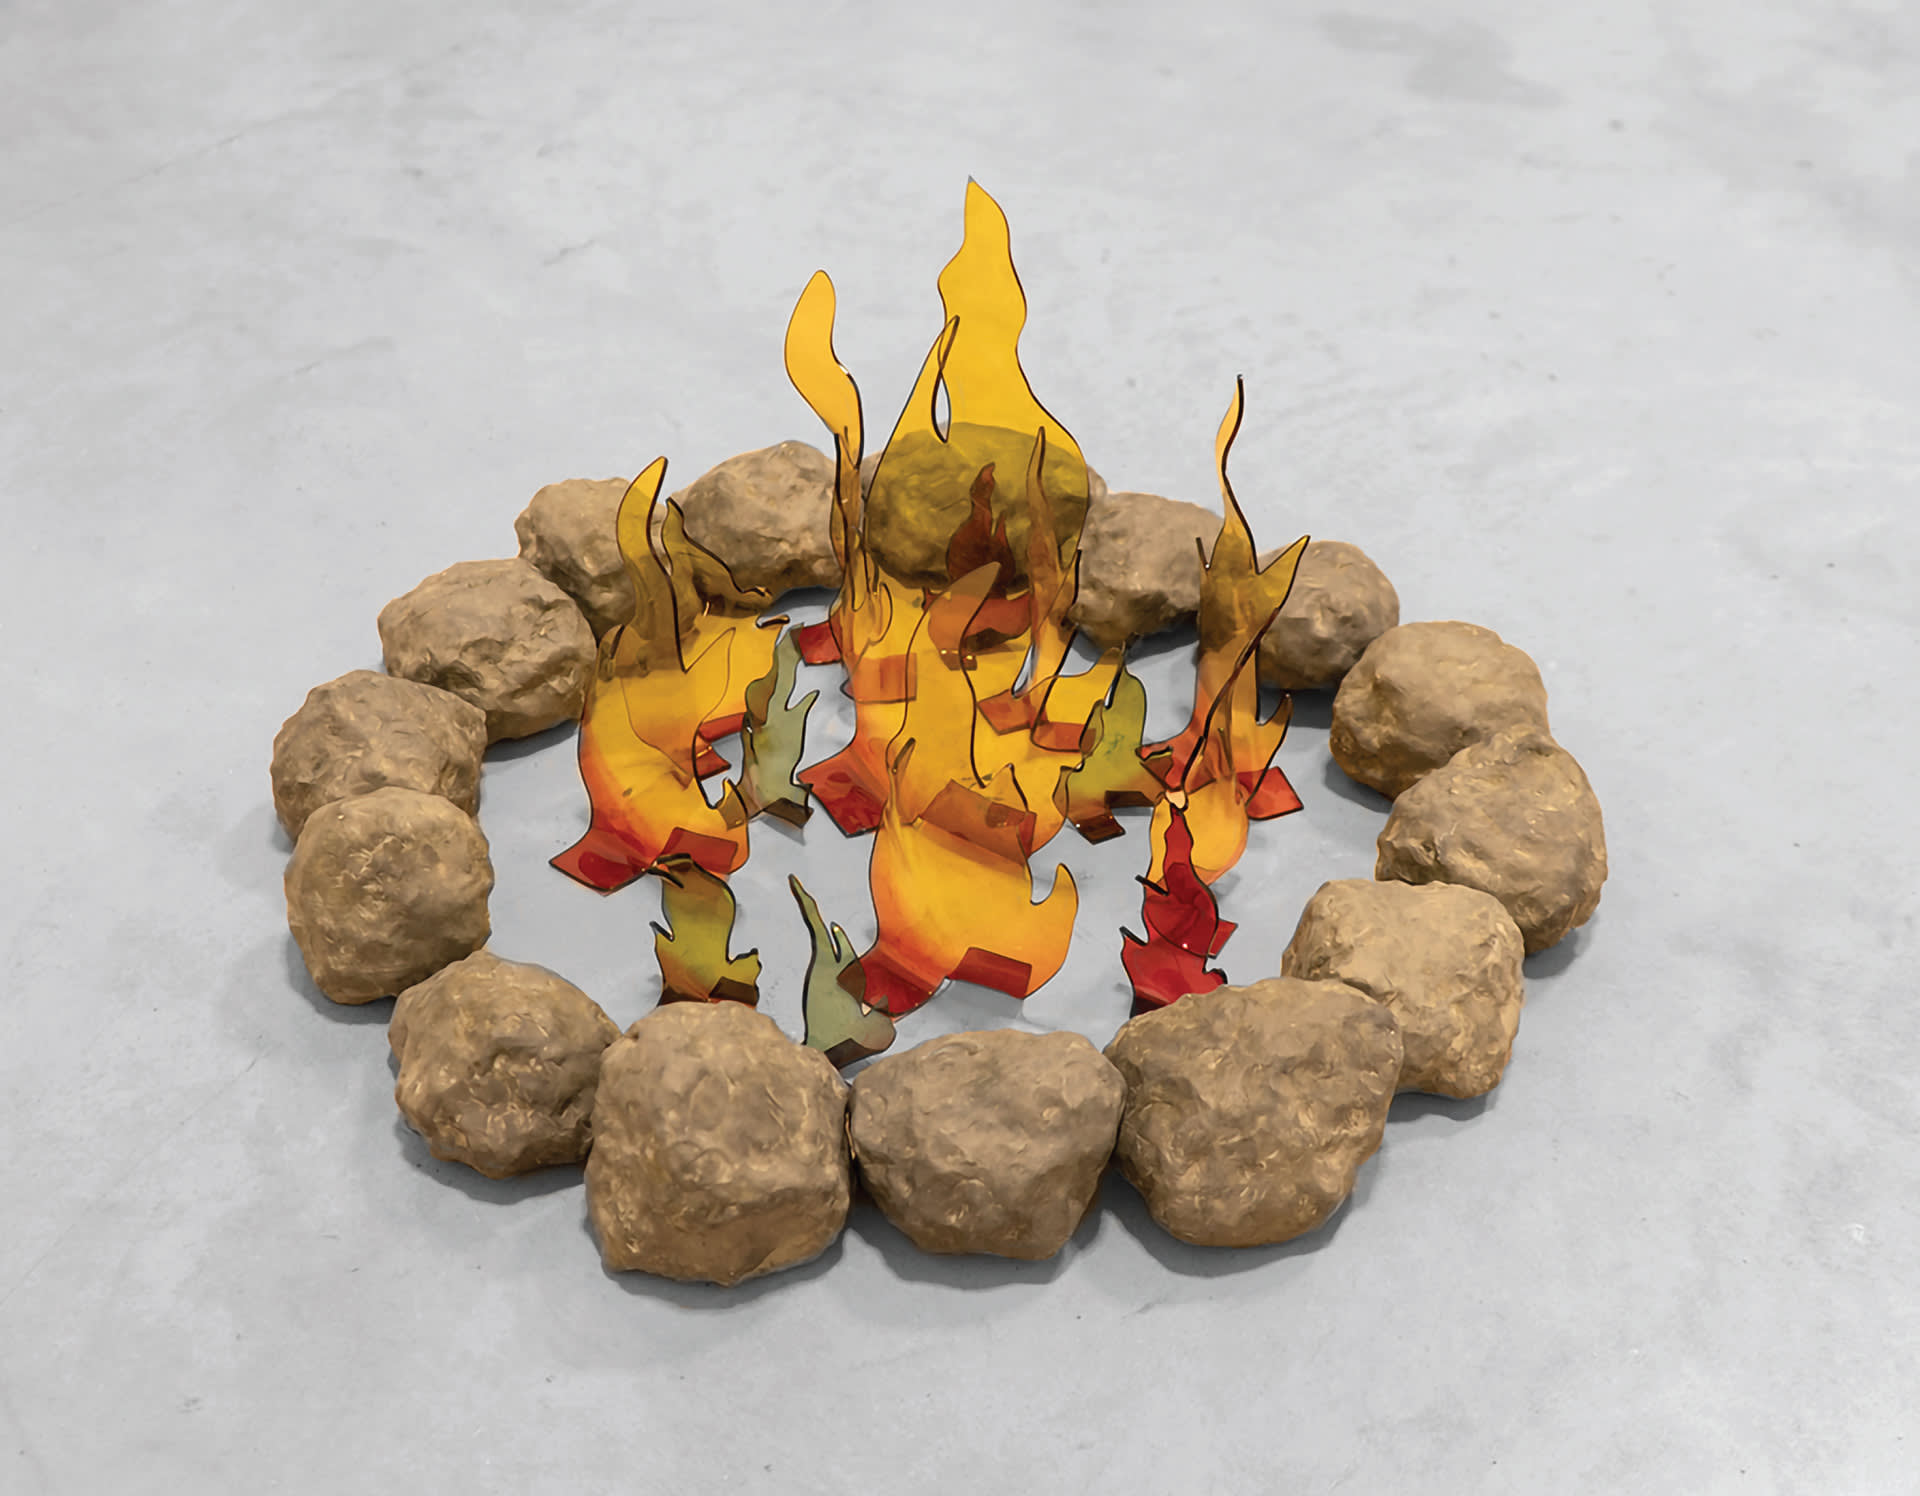 A fire pit made with grey clay stones surrounding red, yellow, green and blue flames in acrylic glass